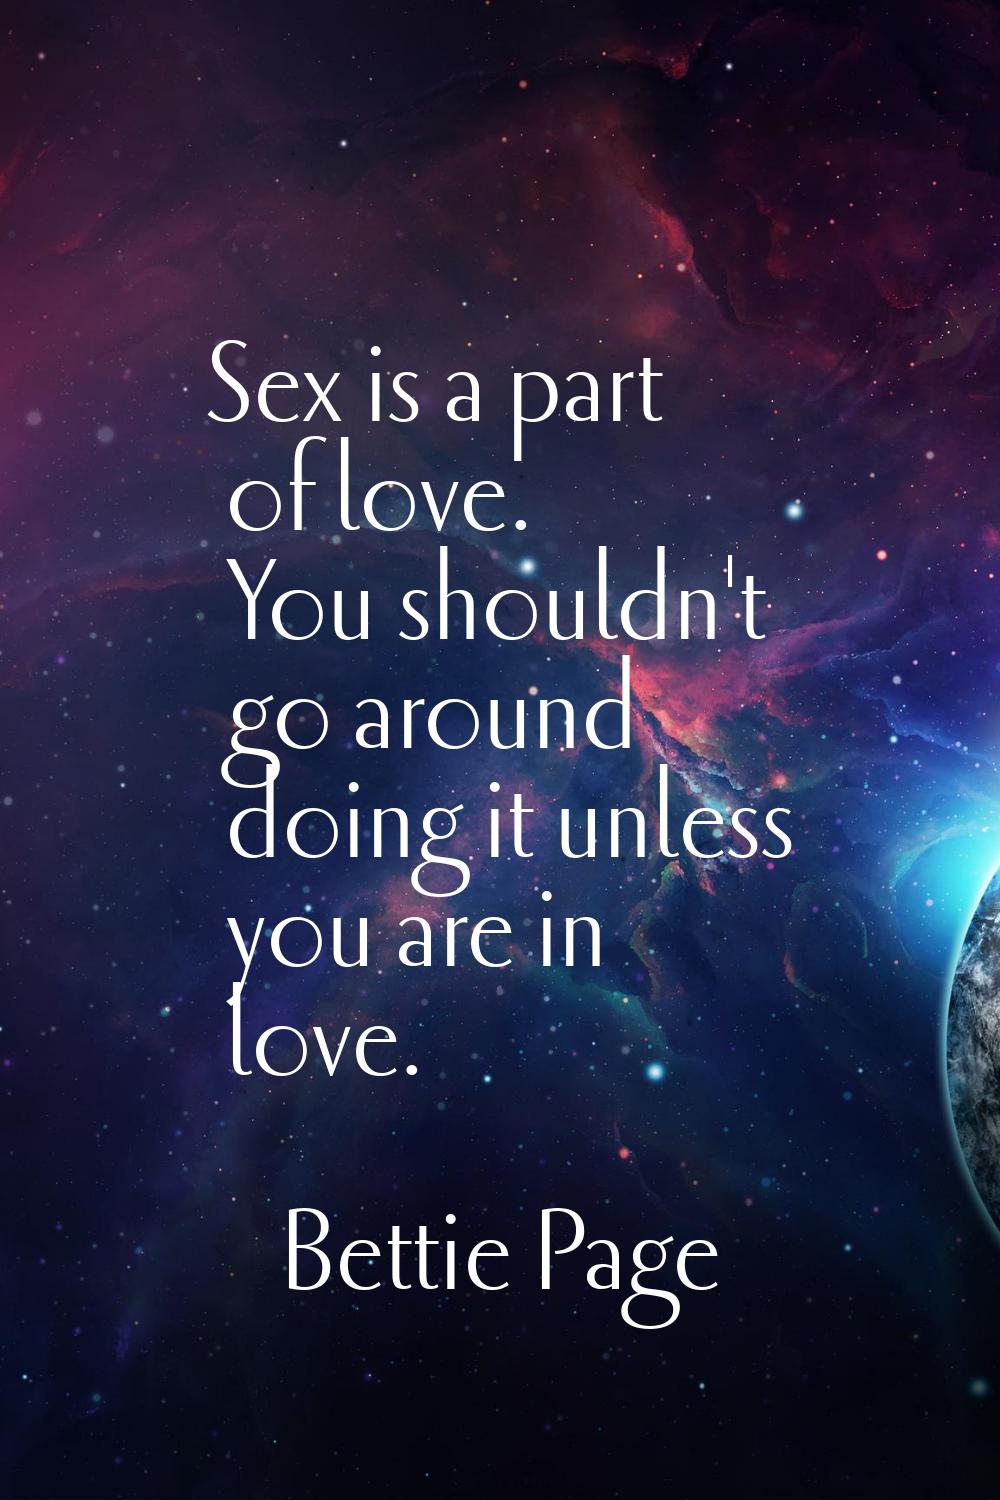 Sex is a part of love. You shouldn't go around doing it unless you are in love.